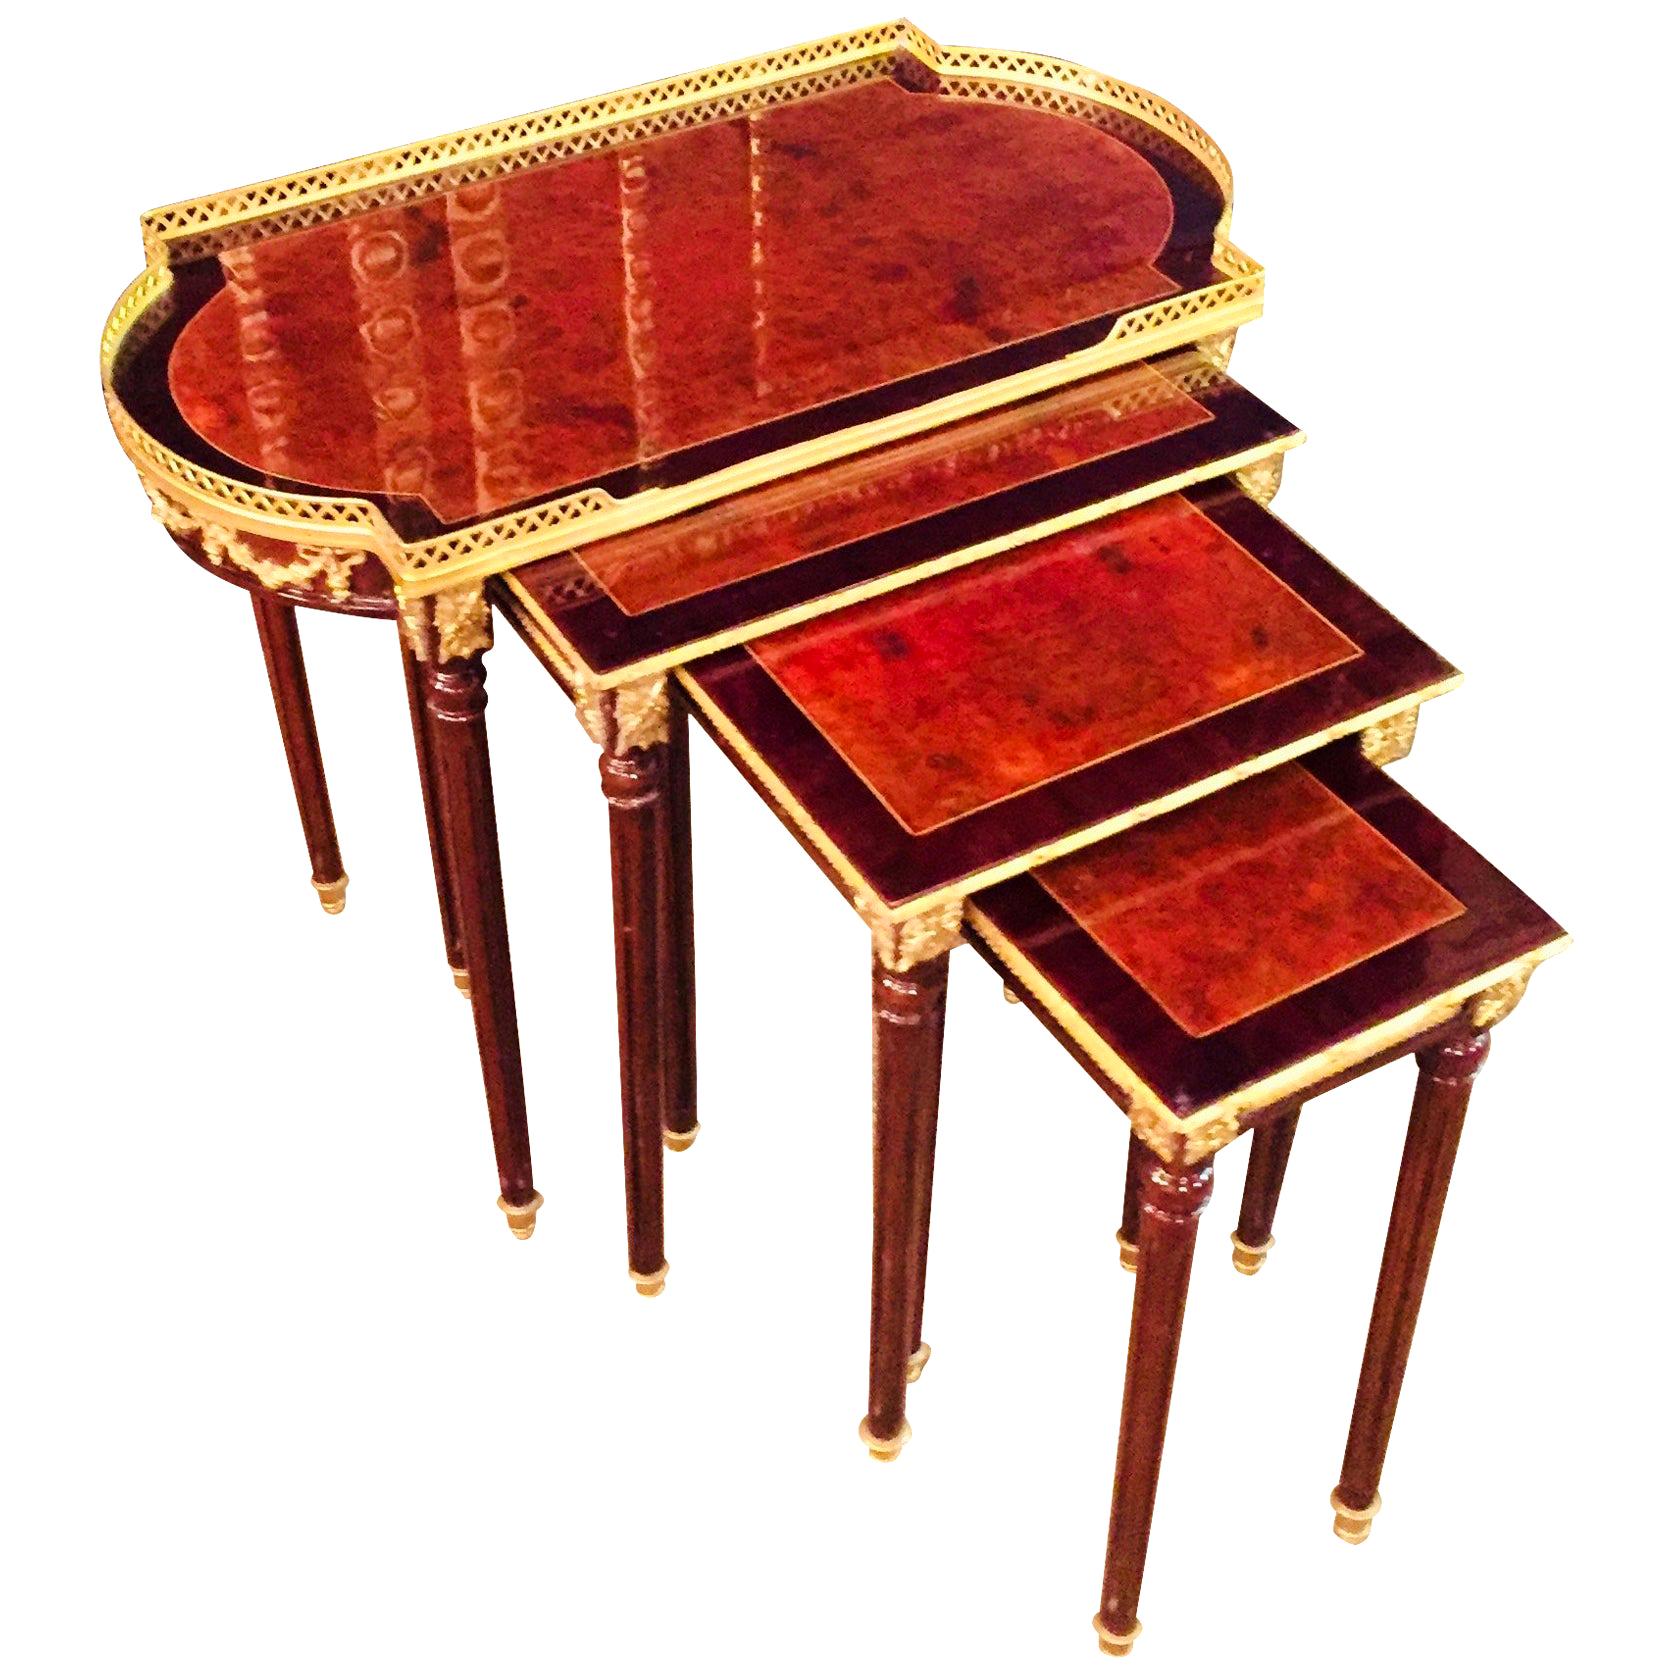 20th Century 4 in 1 Tables in Style of Louis Seize XVI